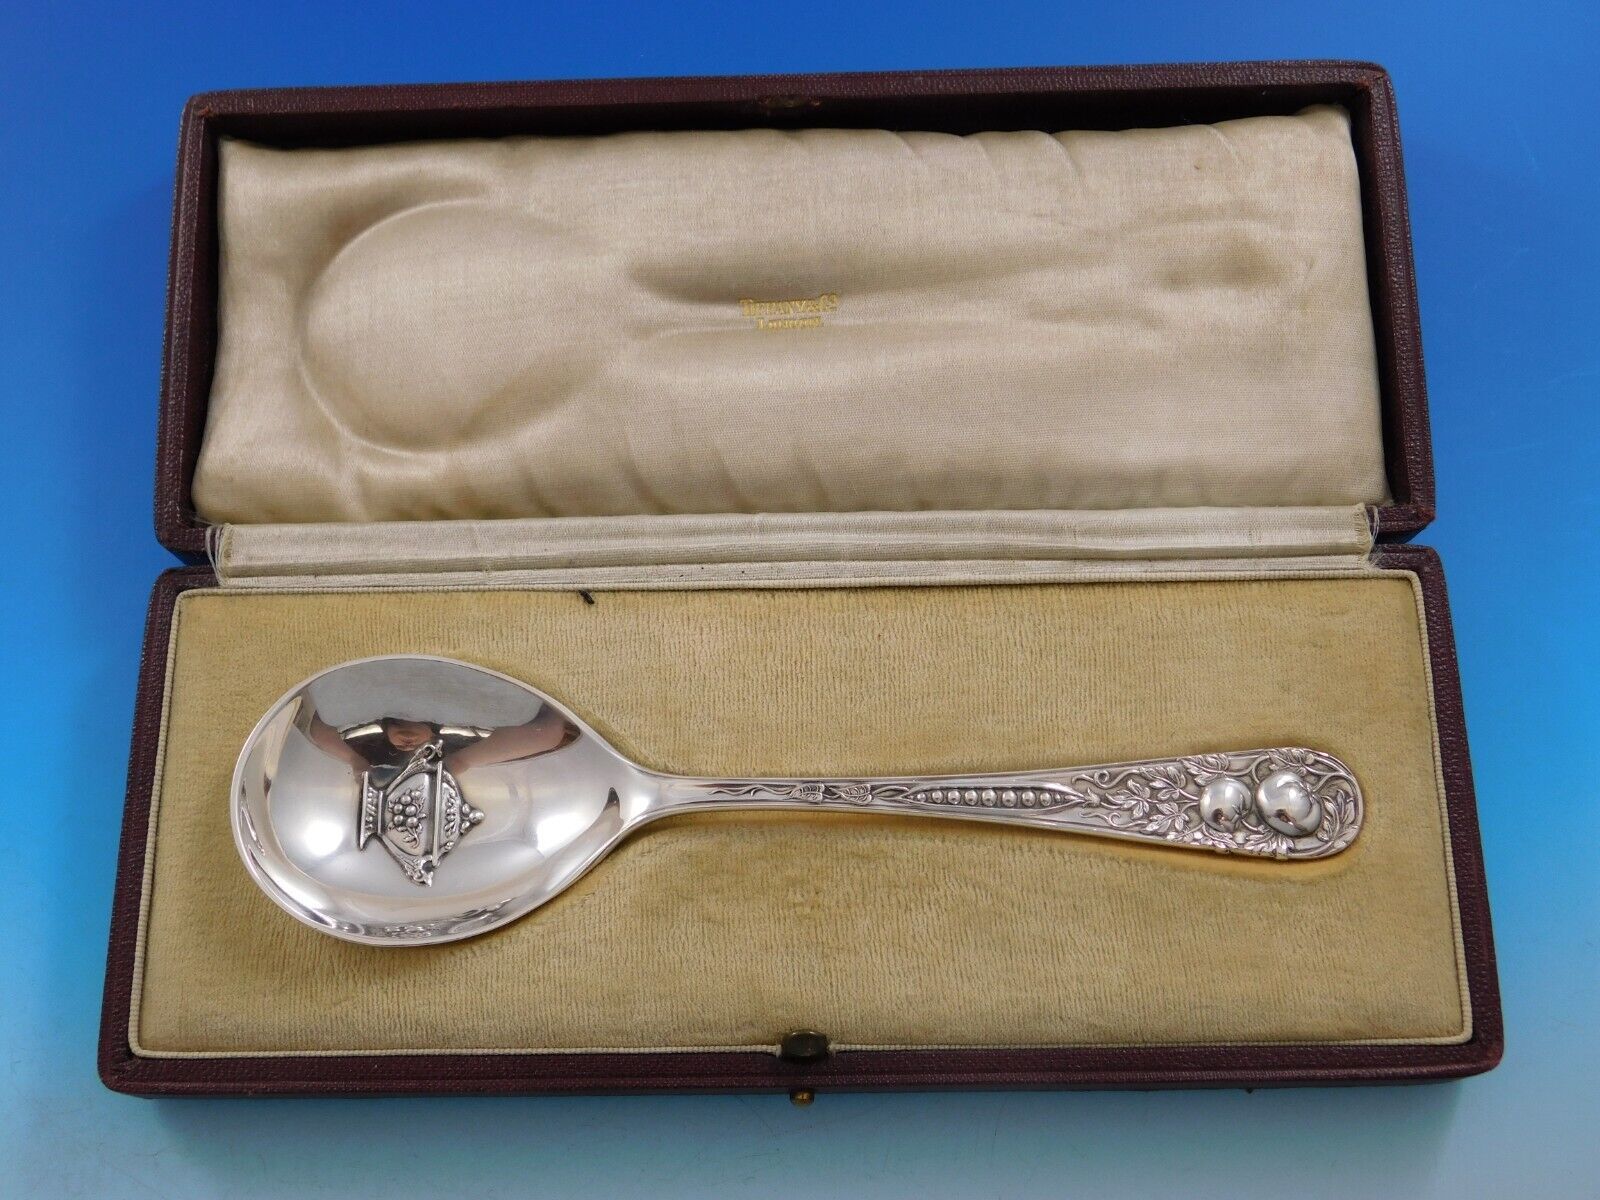 Primary image for Tiffany & Co. Sterling Preserve Spoon In Pres. Box Awarded 1St Pl. 1934 6 3/4"